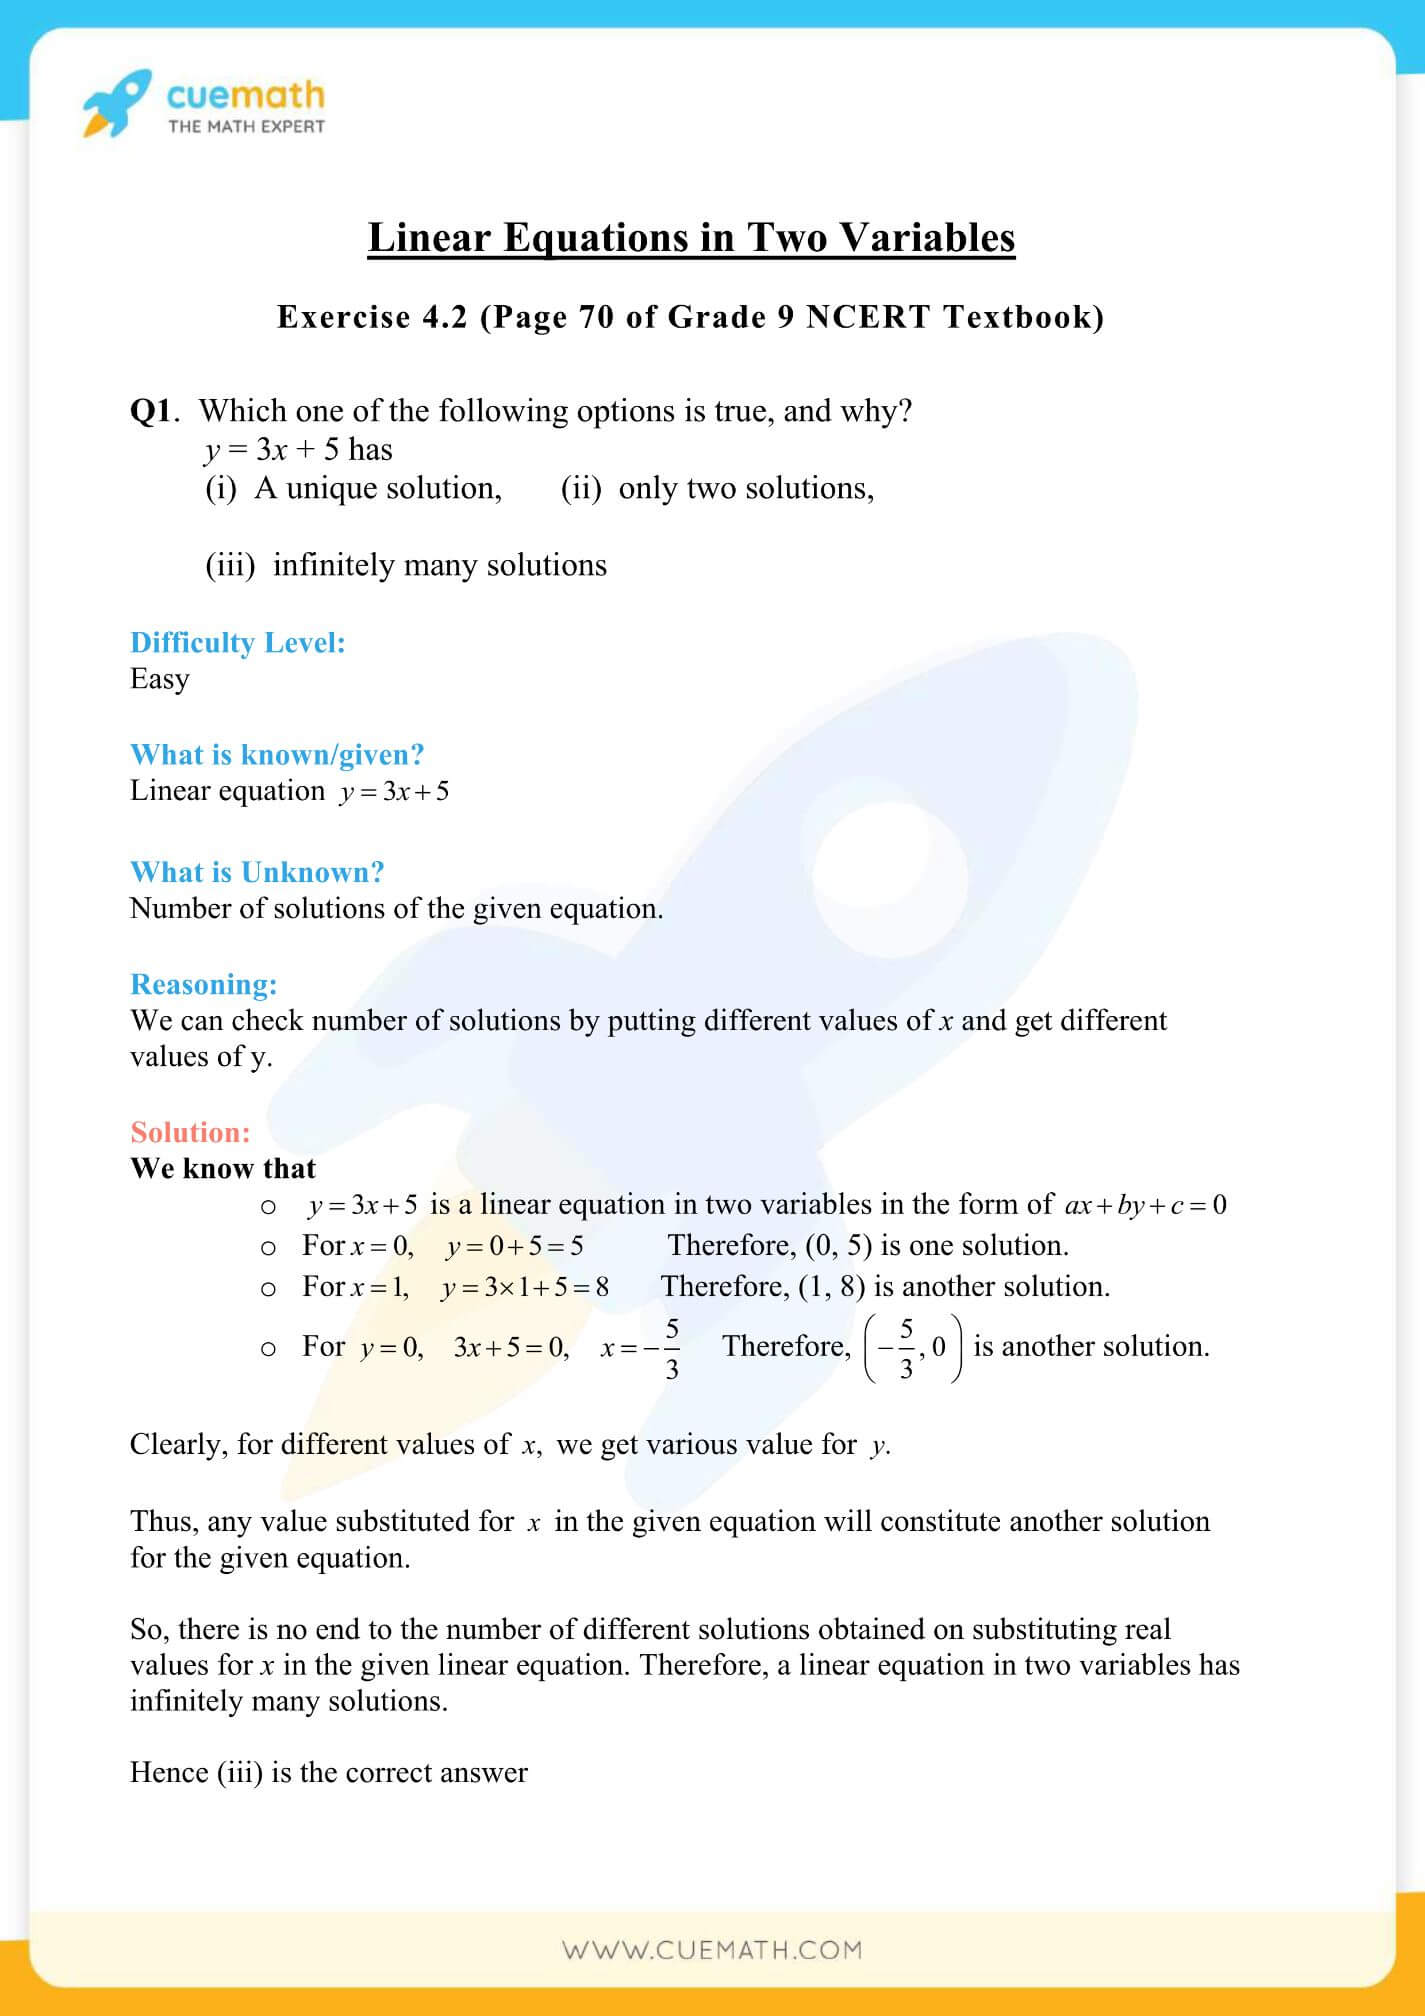 NCERT Solutions Class 9 Math Chapter 4 Linear Equations In Two Variables 4